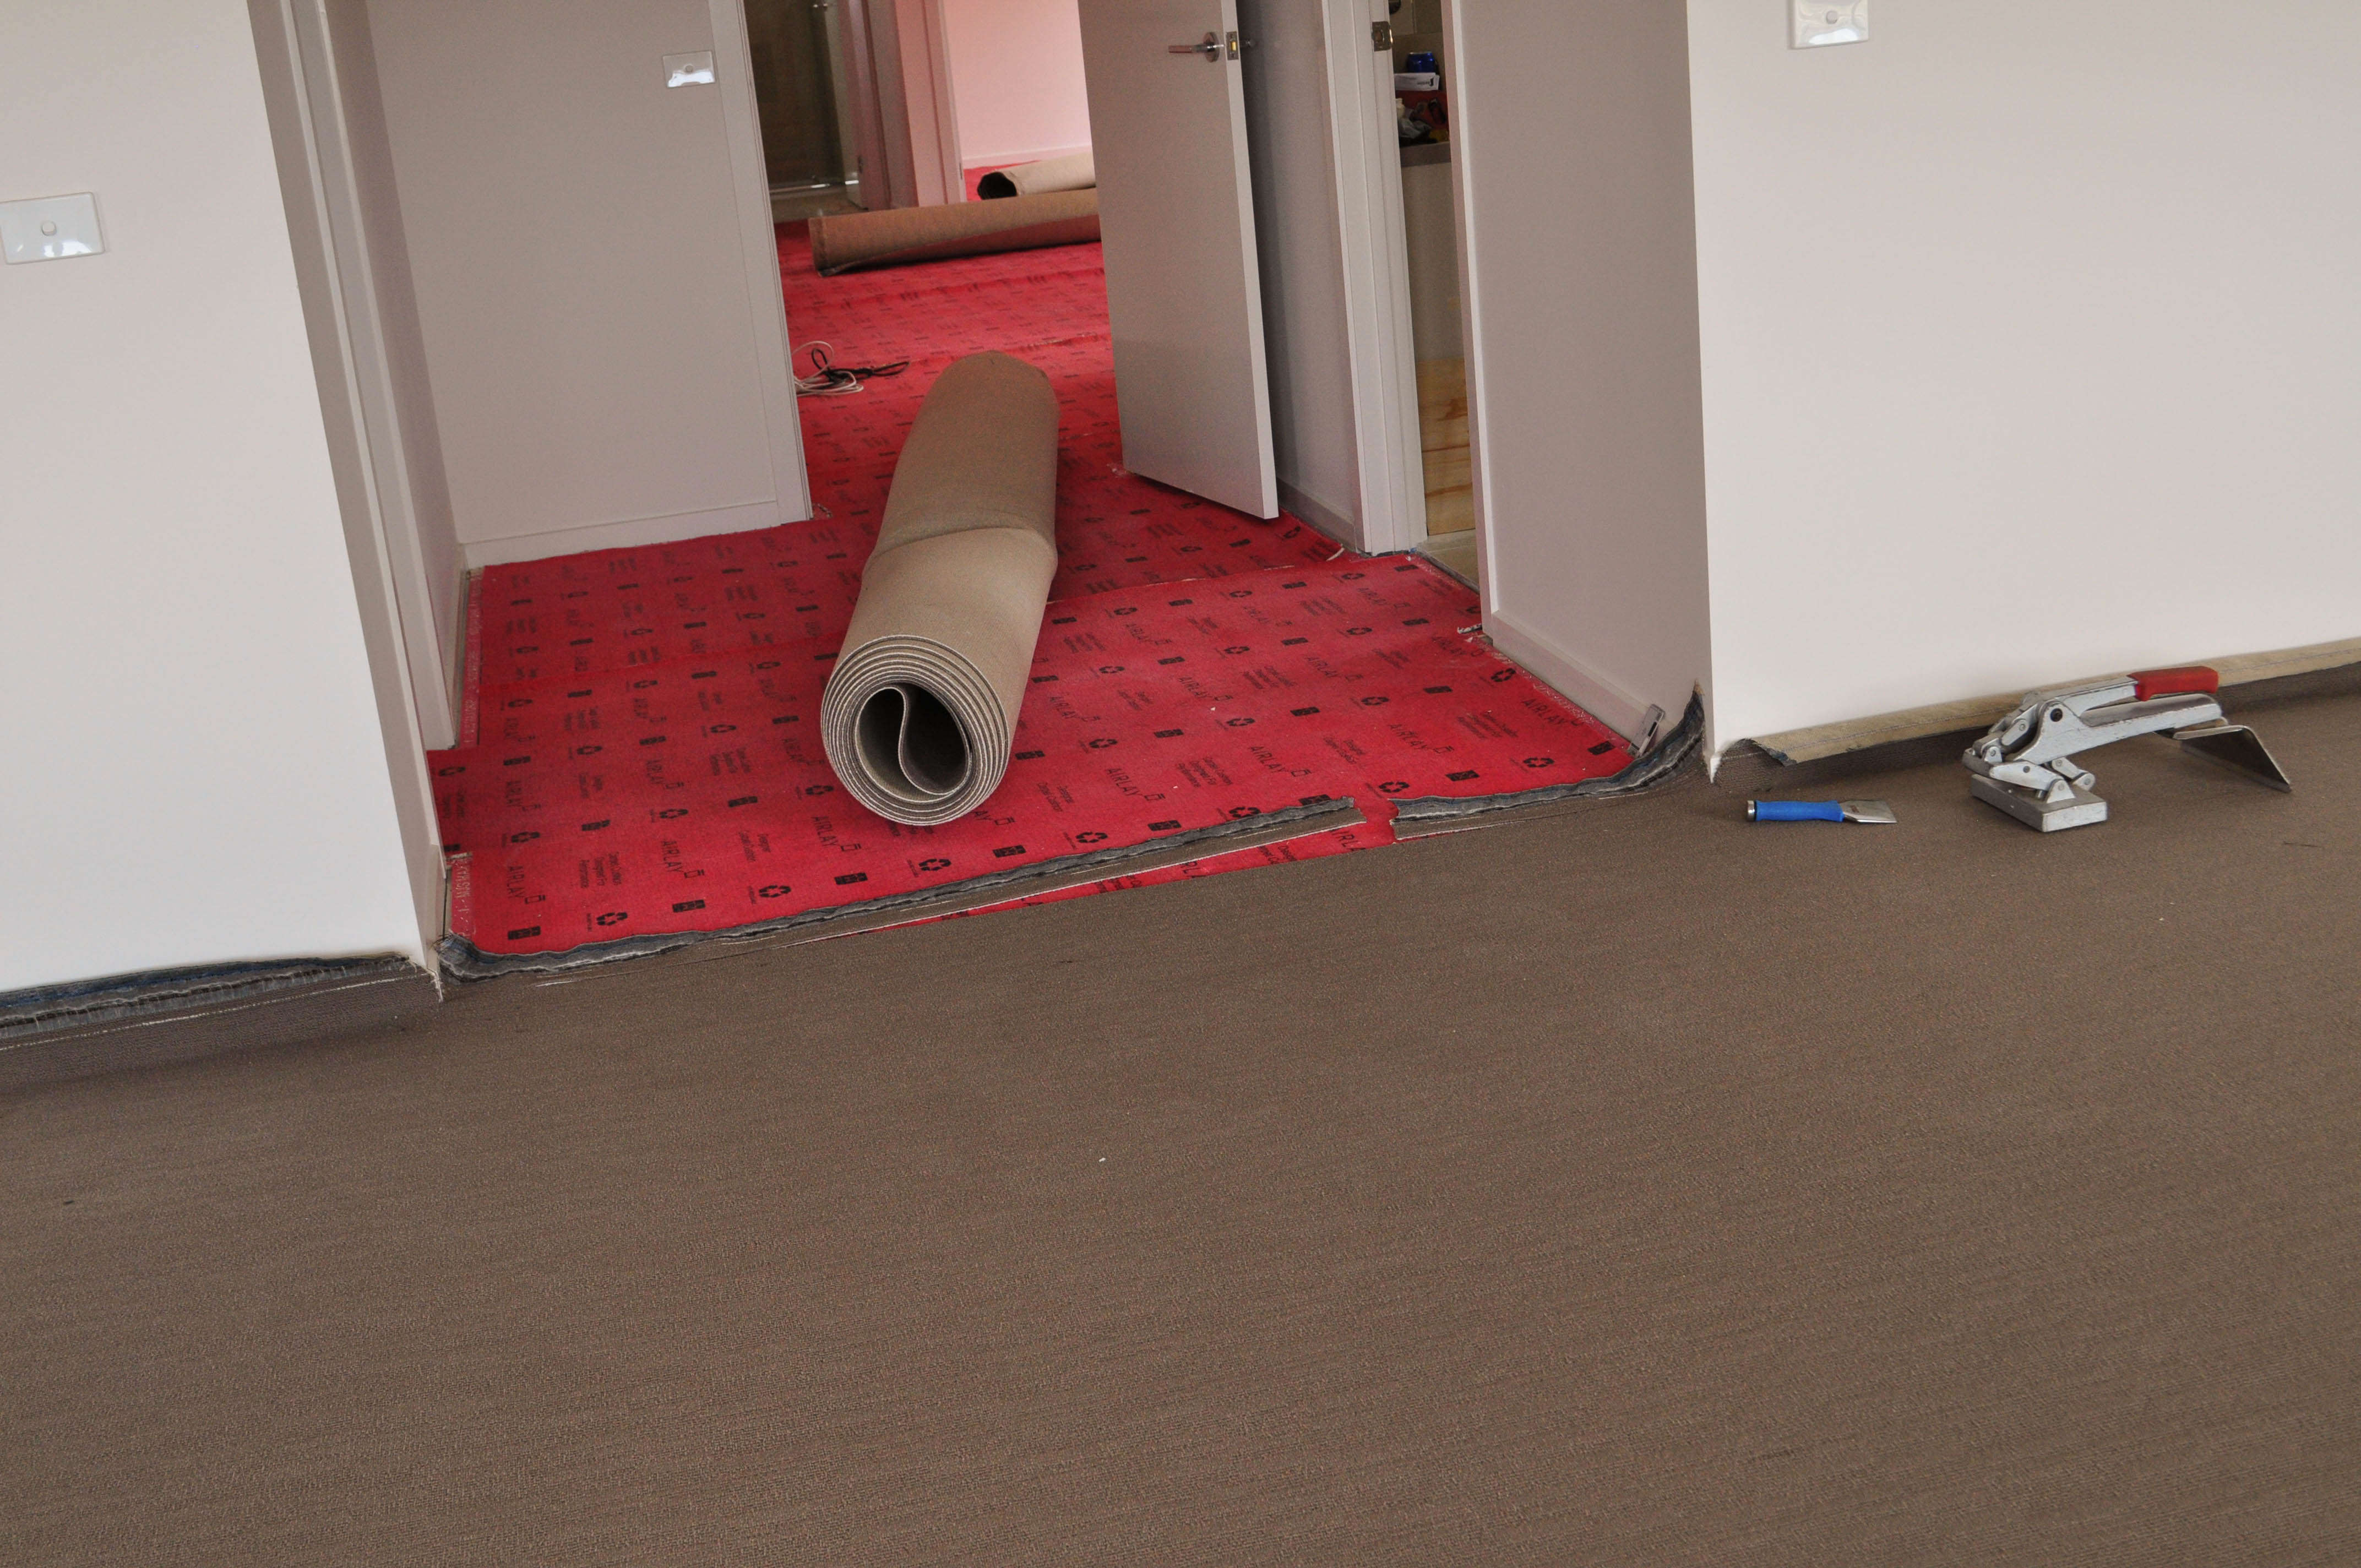 carpet laying process under way by Concord Floors, showing rolls of carpet, one stretched out, on top of installed red underlay in a home in
 Point Cook, Werribee Vic 3030.